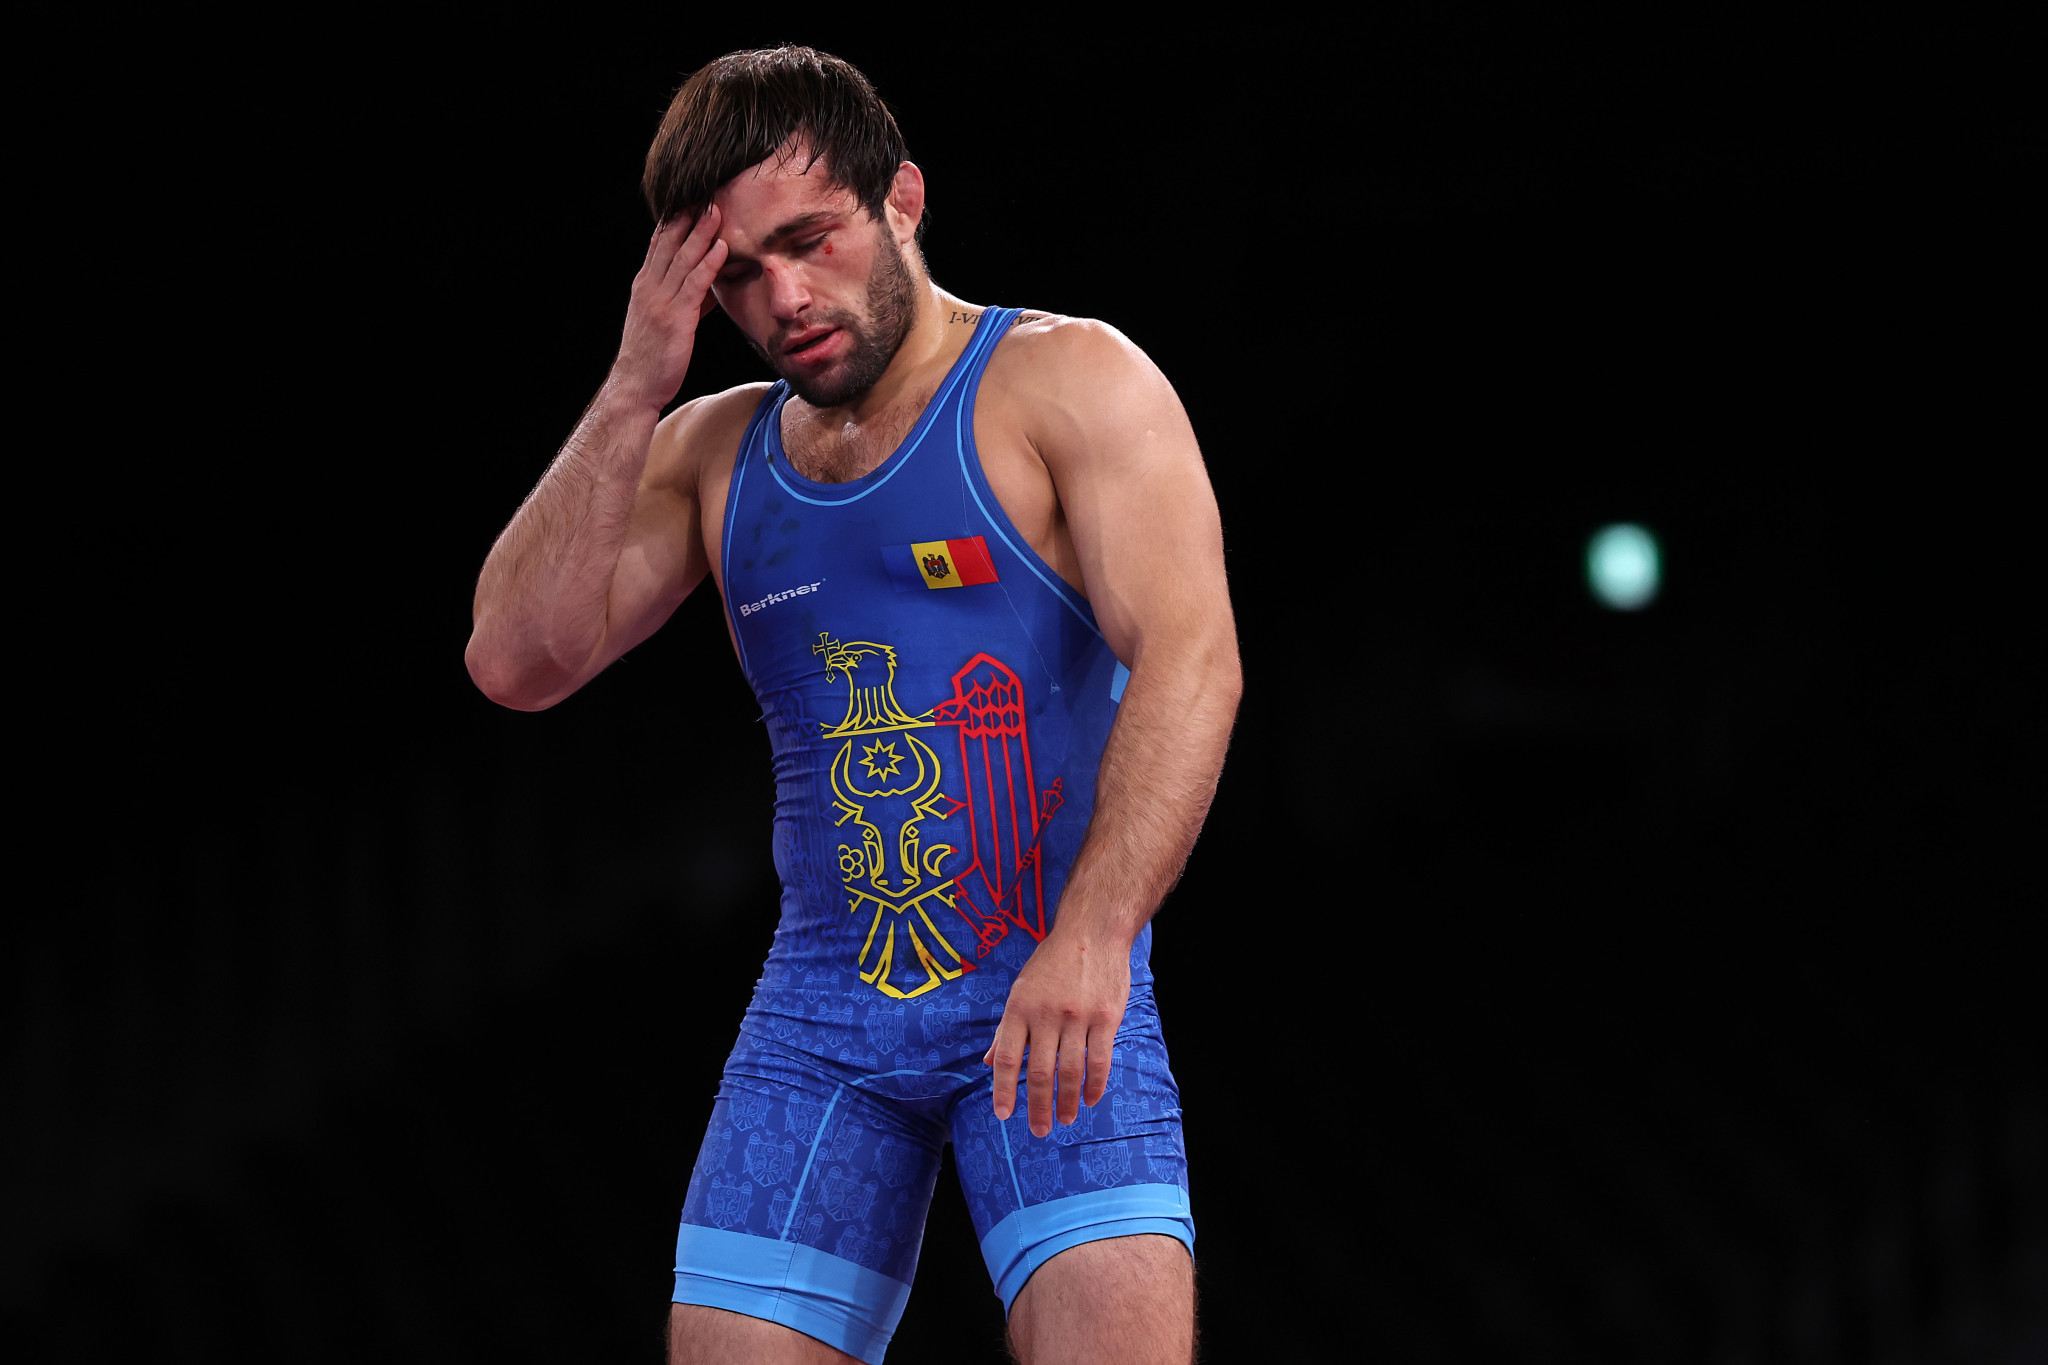 Victor Ciobanu earned Moldova's first ever Greco-Roman gold at the UWW World Championships in the under-60kg event ©Getty Images